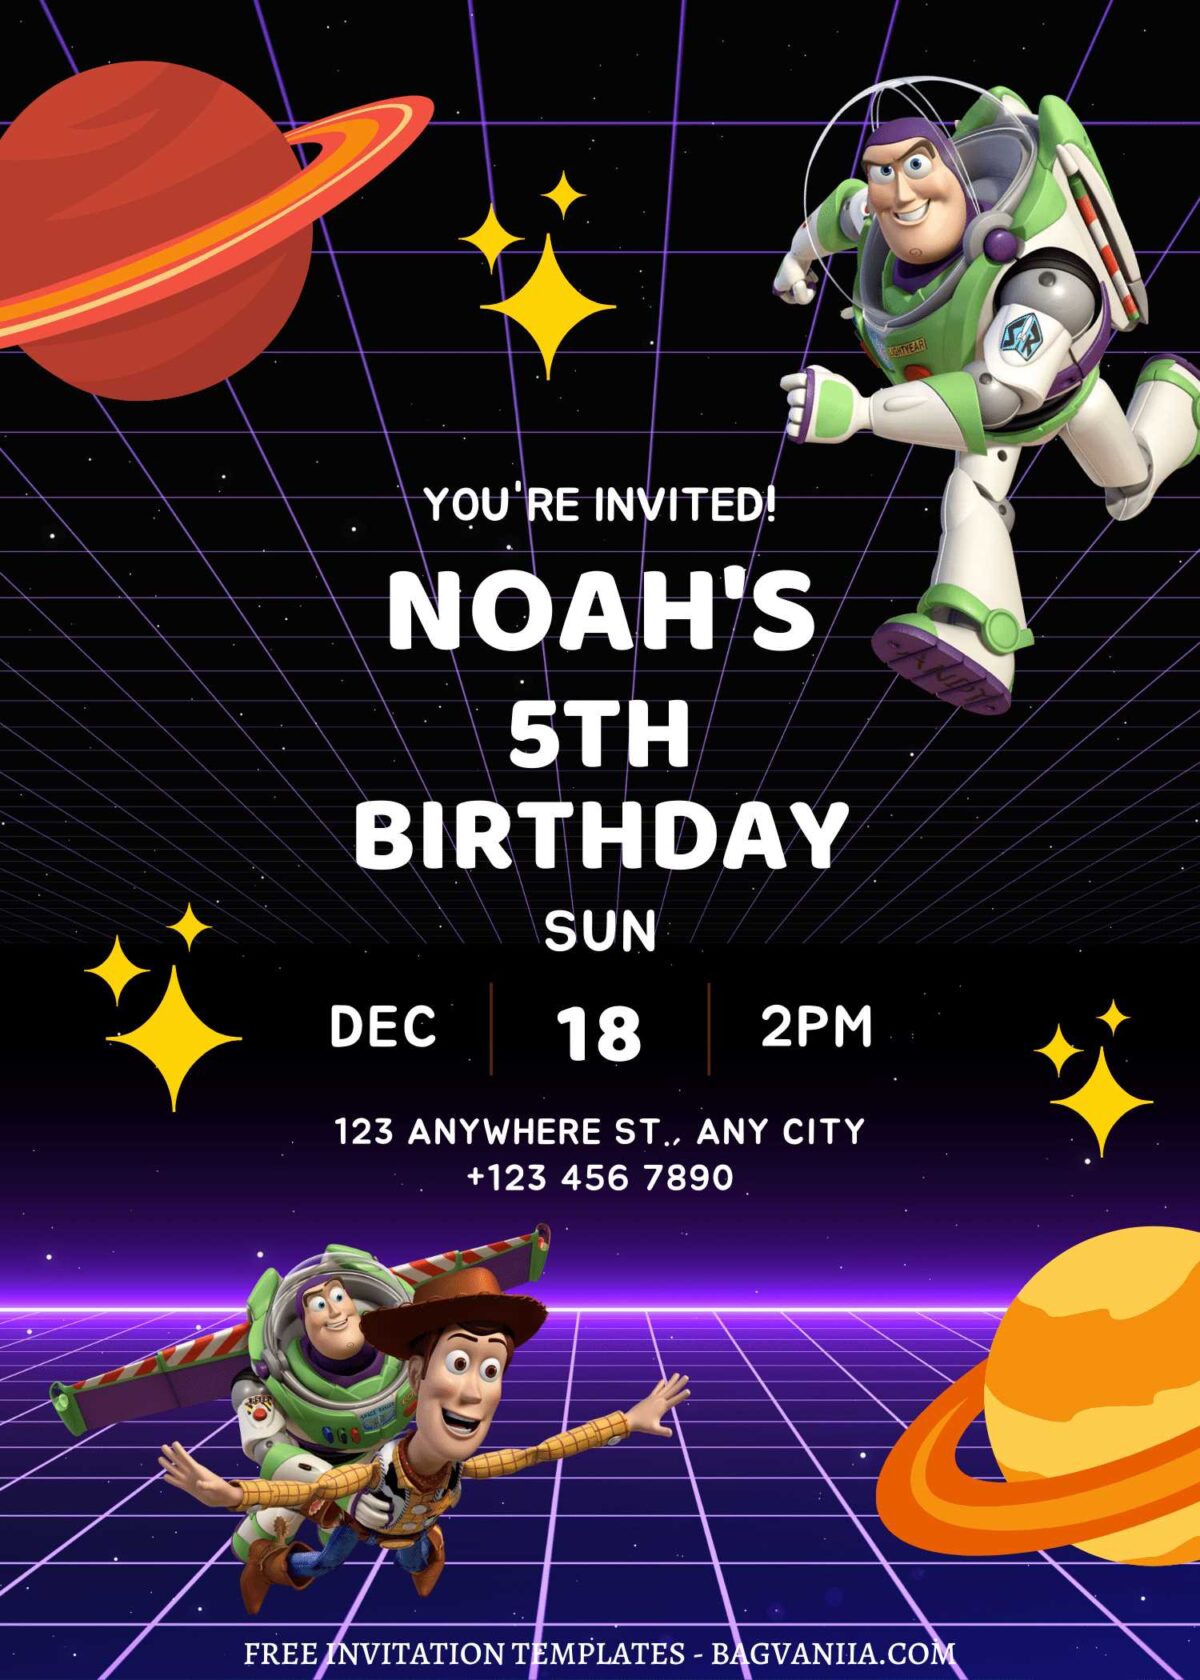 FREE EDITABLE - 8+ Space Ranger Buzz Canva Birthday Invitation Templates  with galaxy background